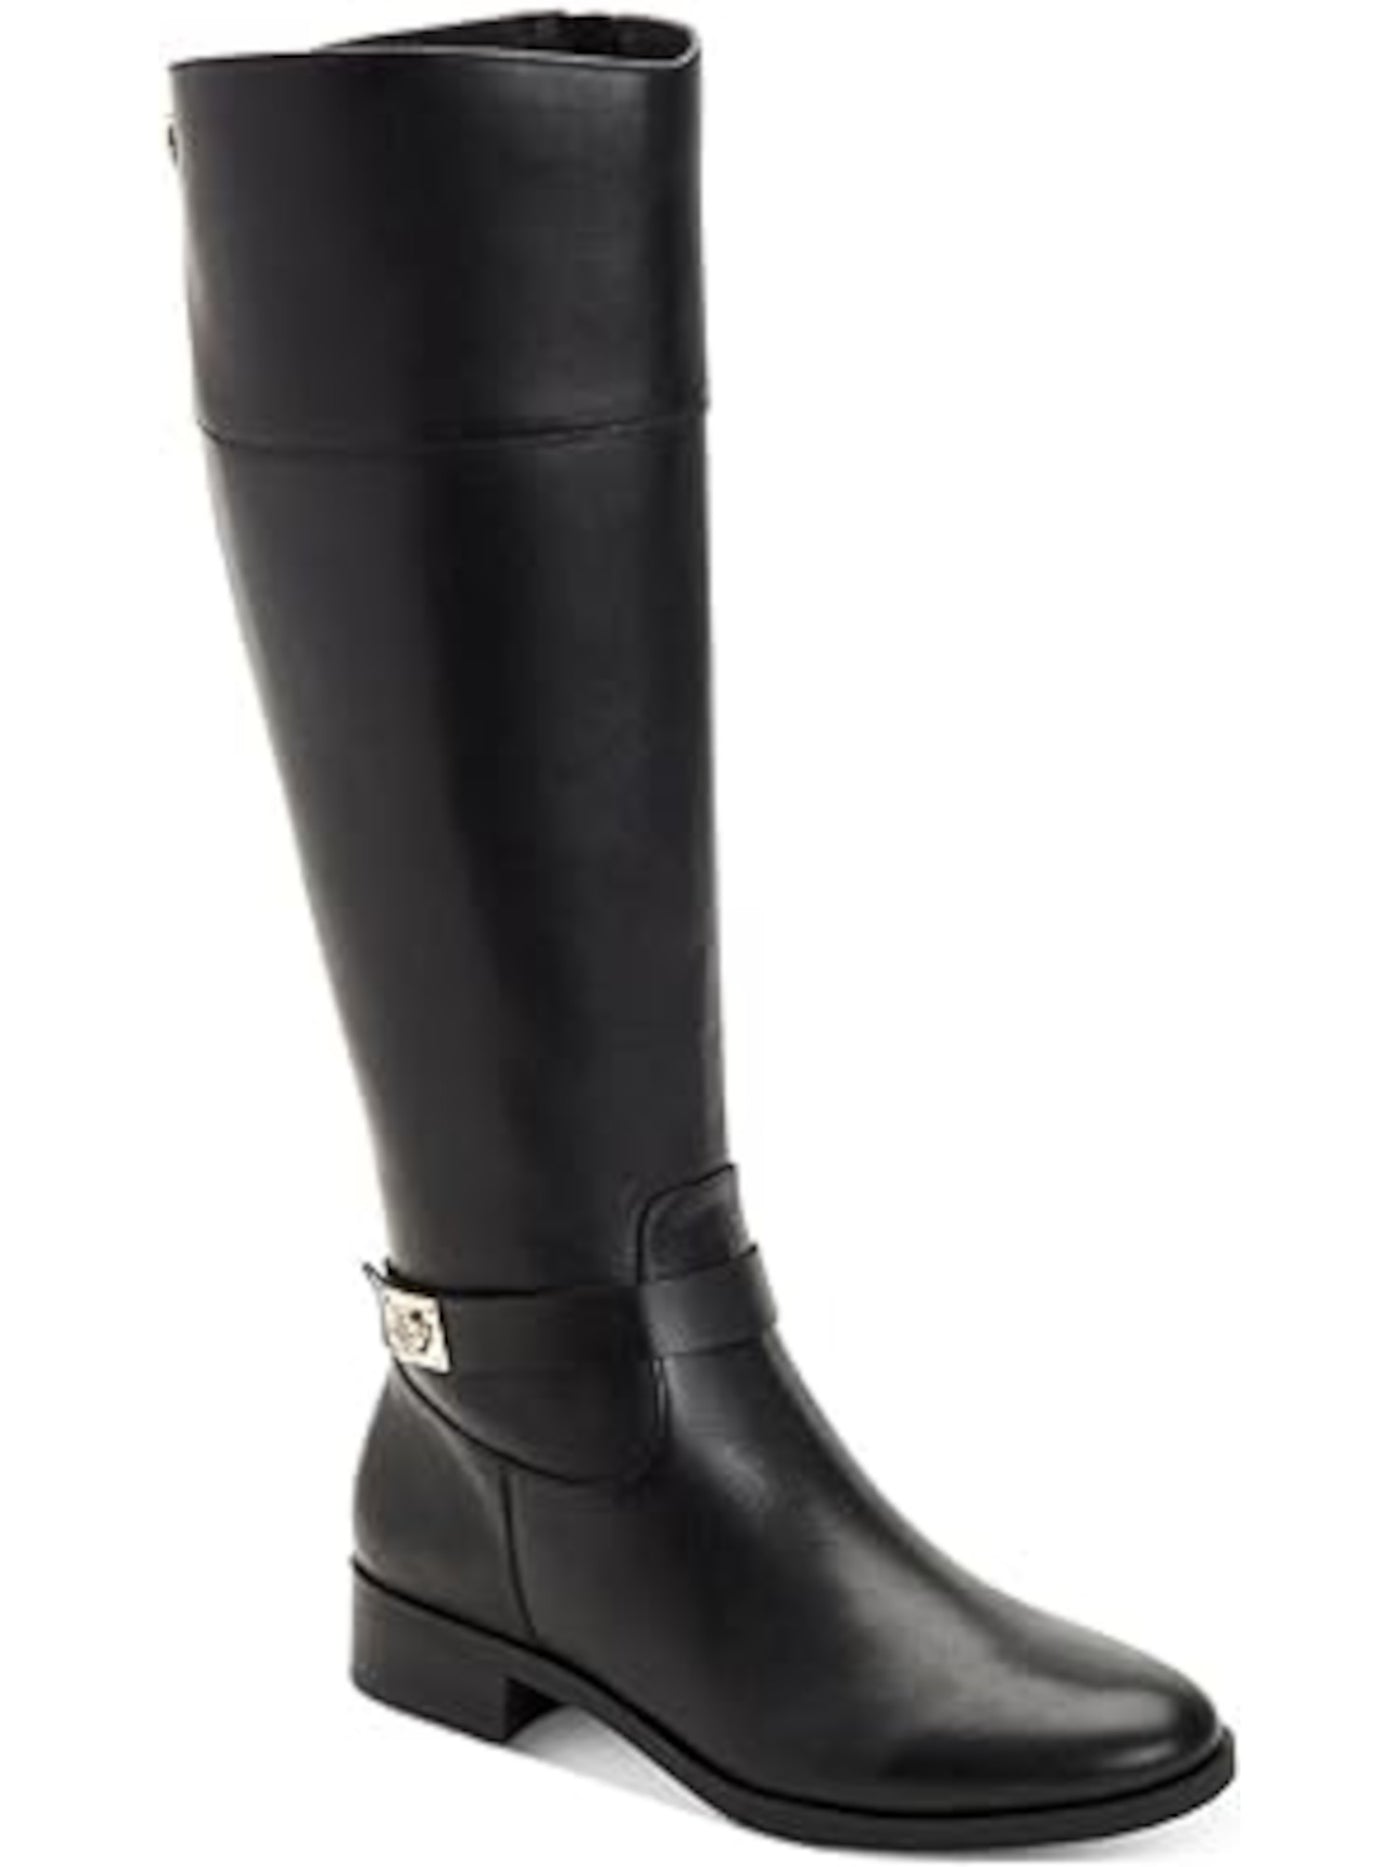 CHARTER CLUB Womens Black Buckle Accent Johannes Round Toe Zip-Up Riding Boot 7.5 M